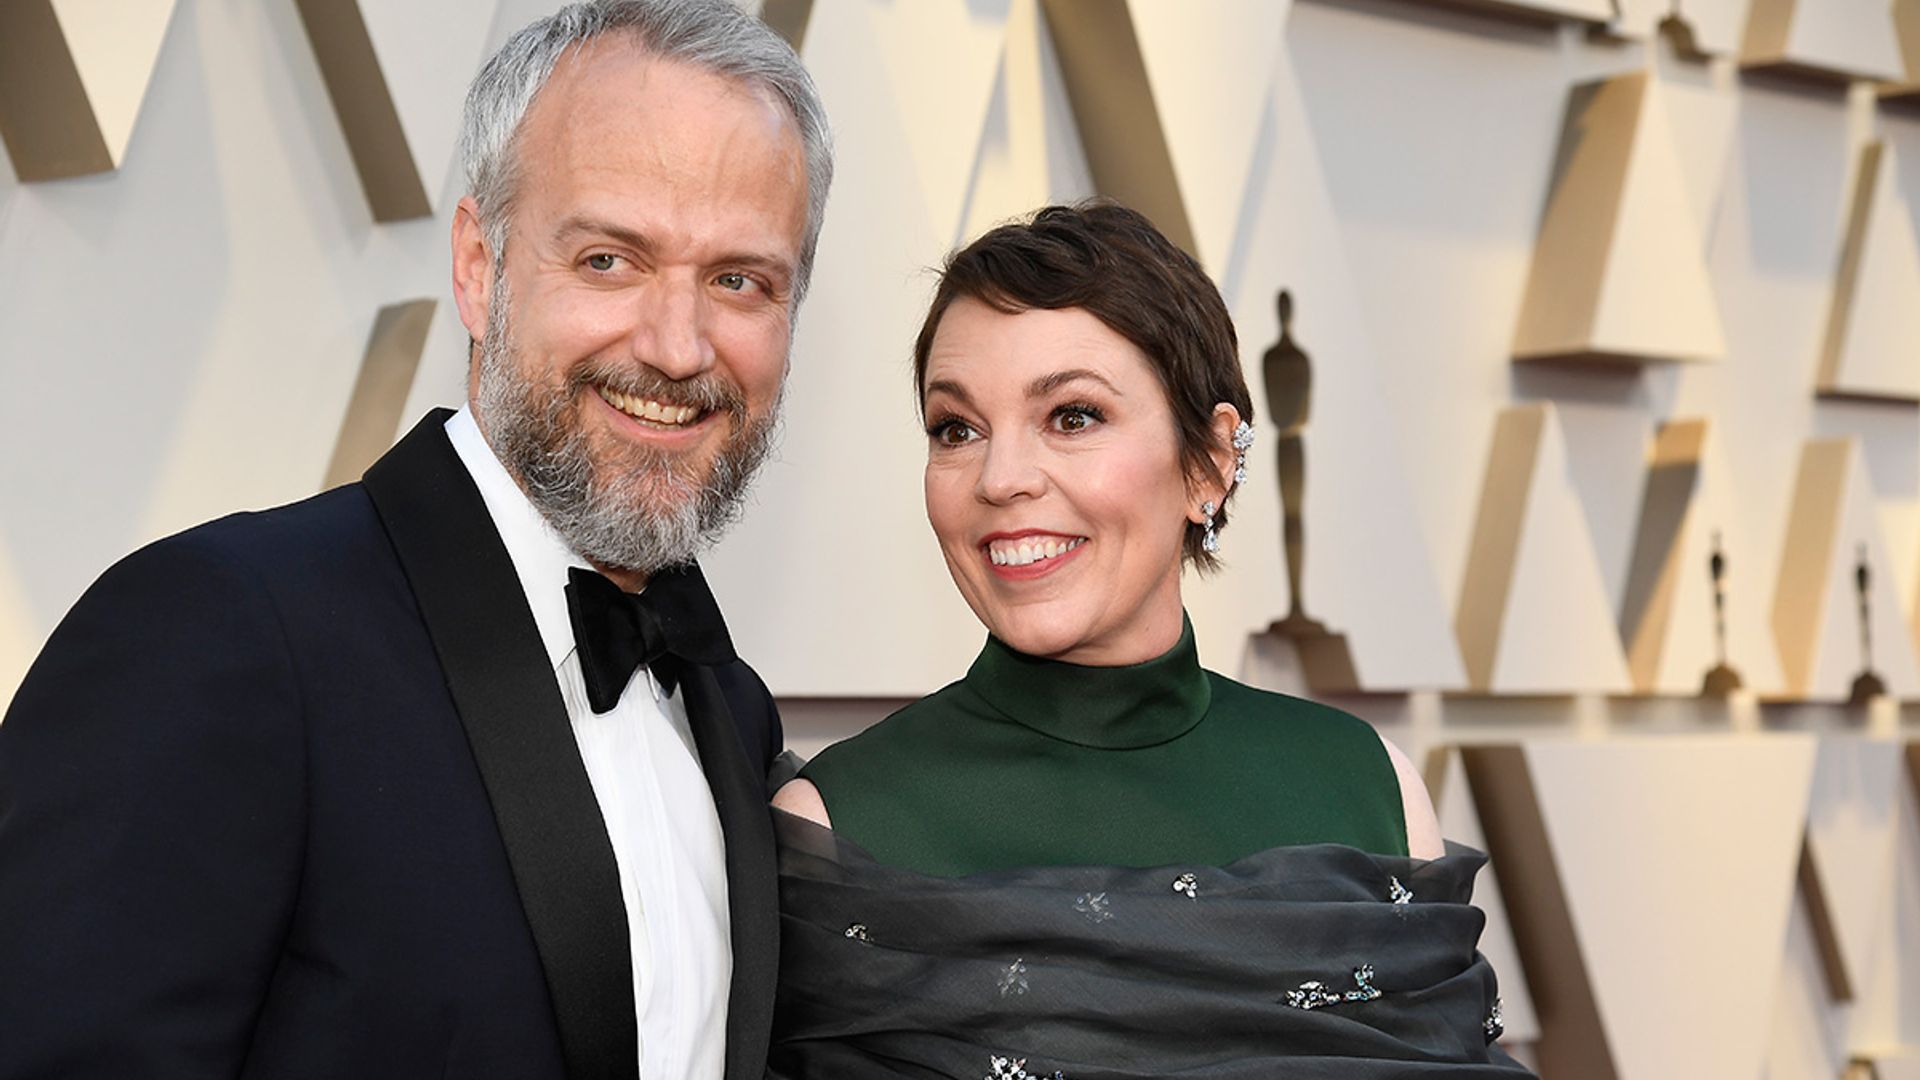 Everything you need to know about Olivia Colman's husband and children